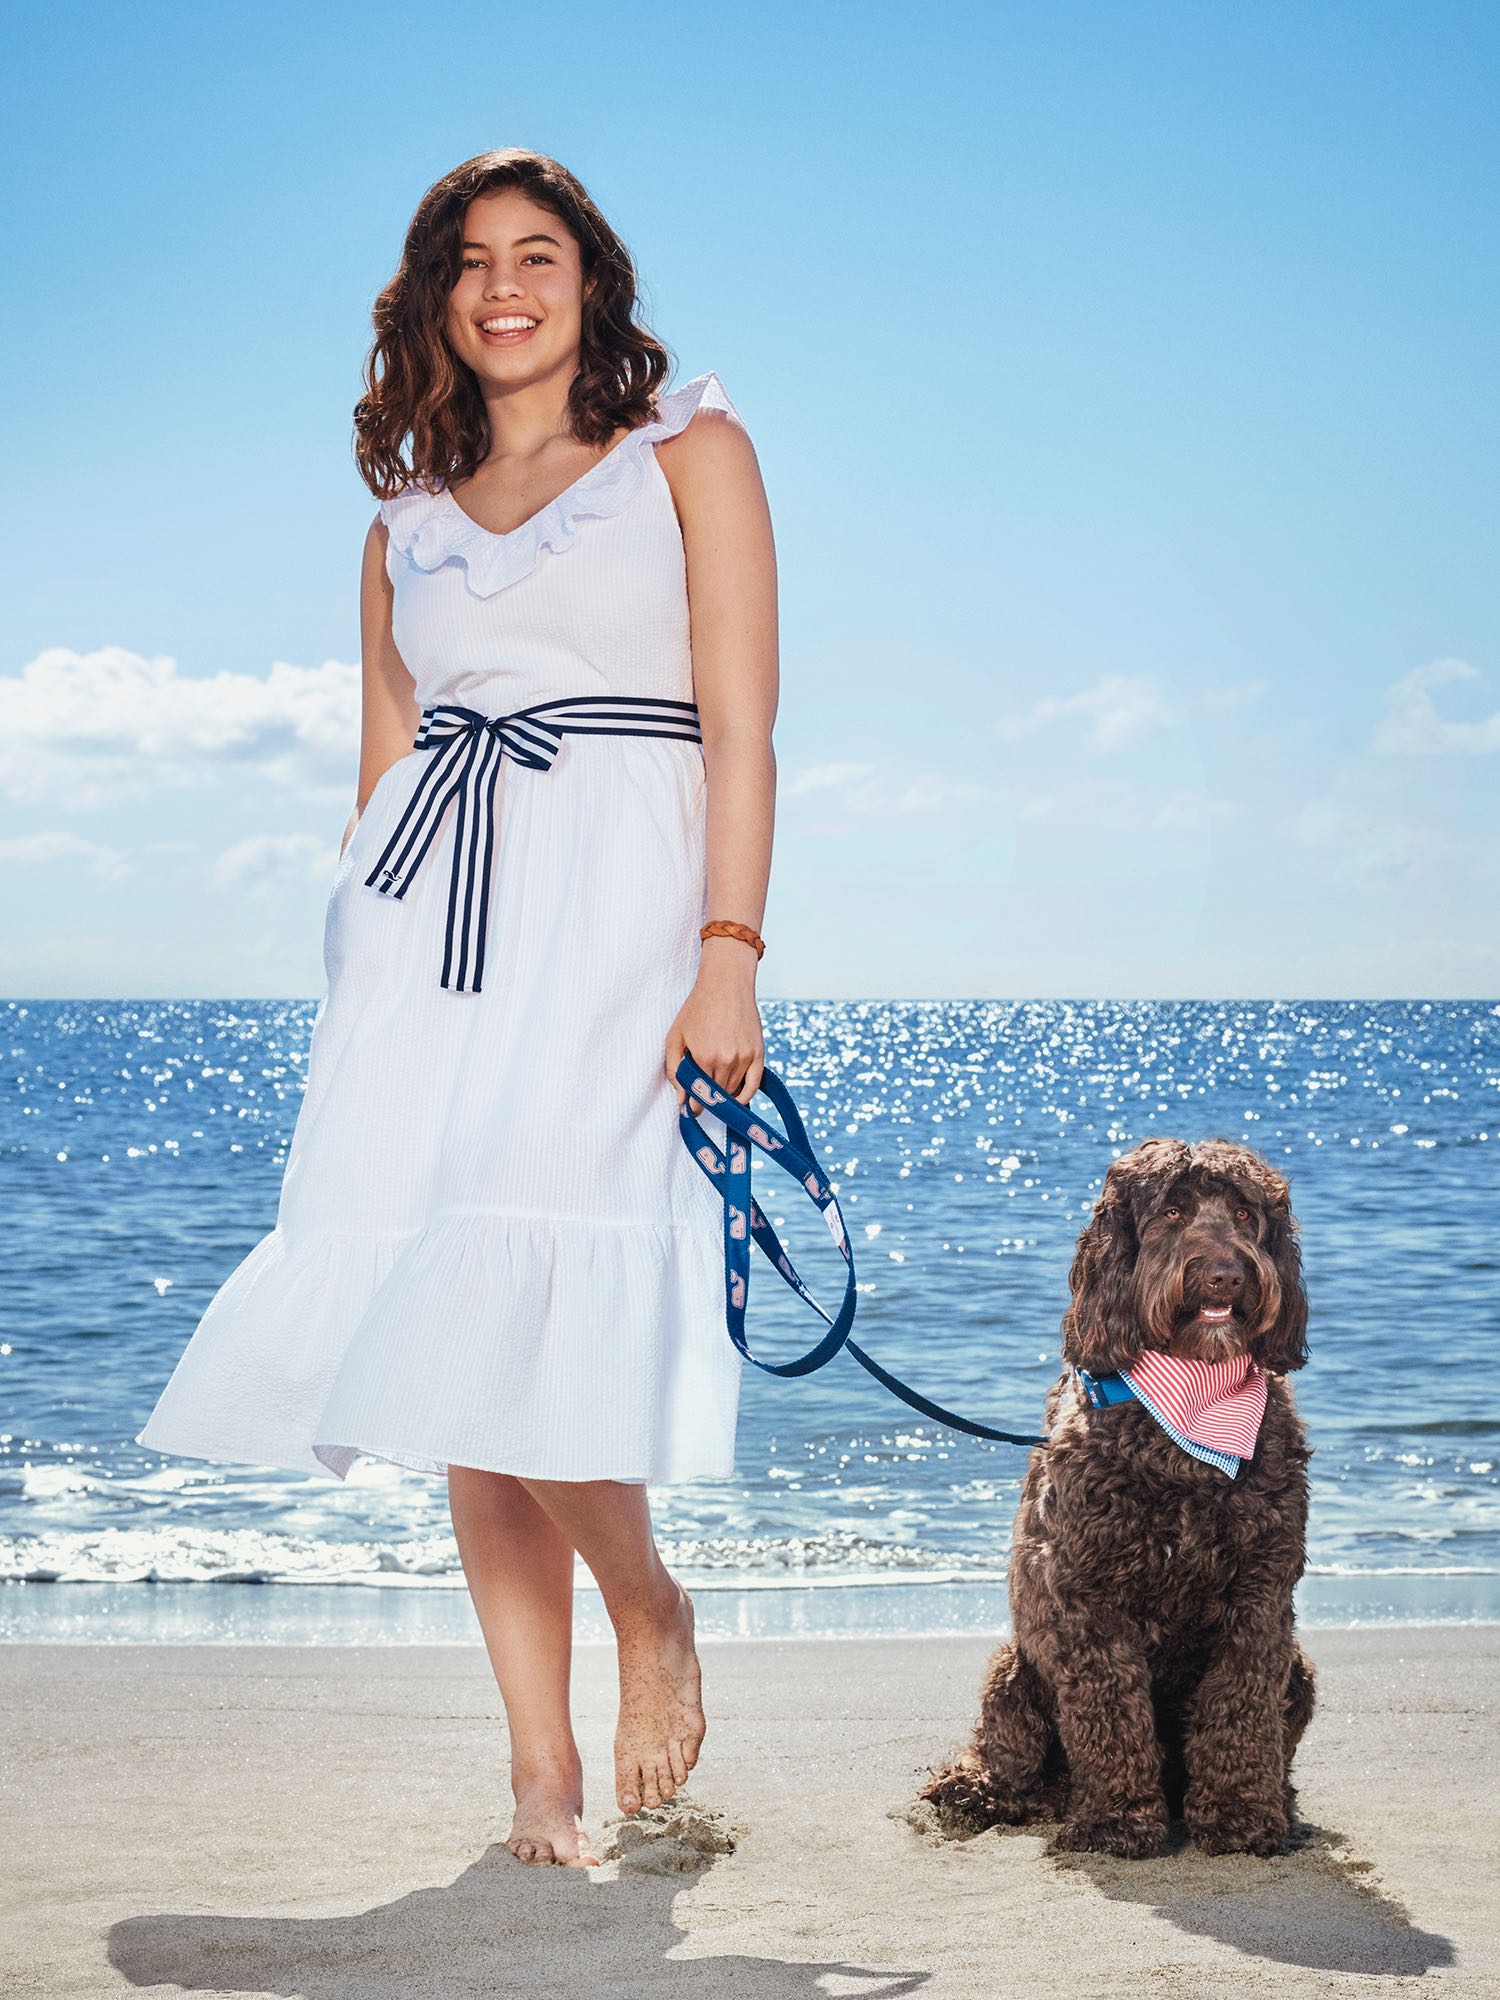 See photos of the Vineyard Vines for Target collection coming to stores Saturday, May 18!